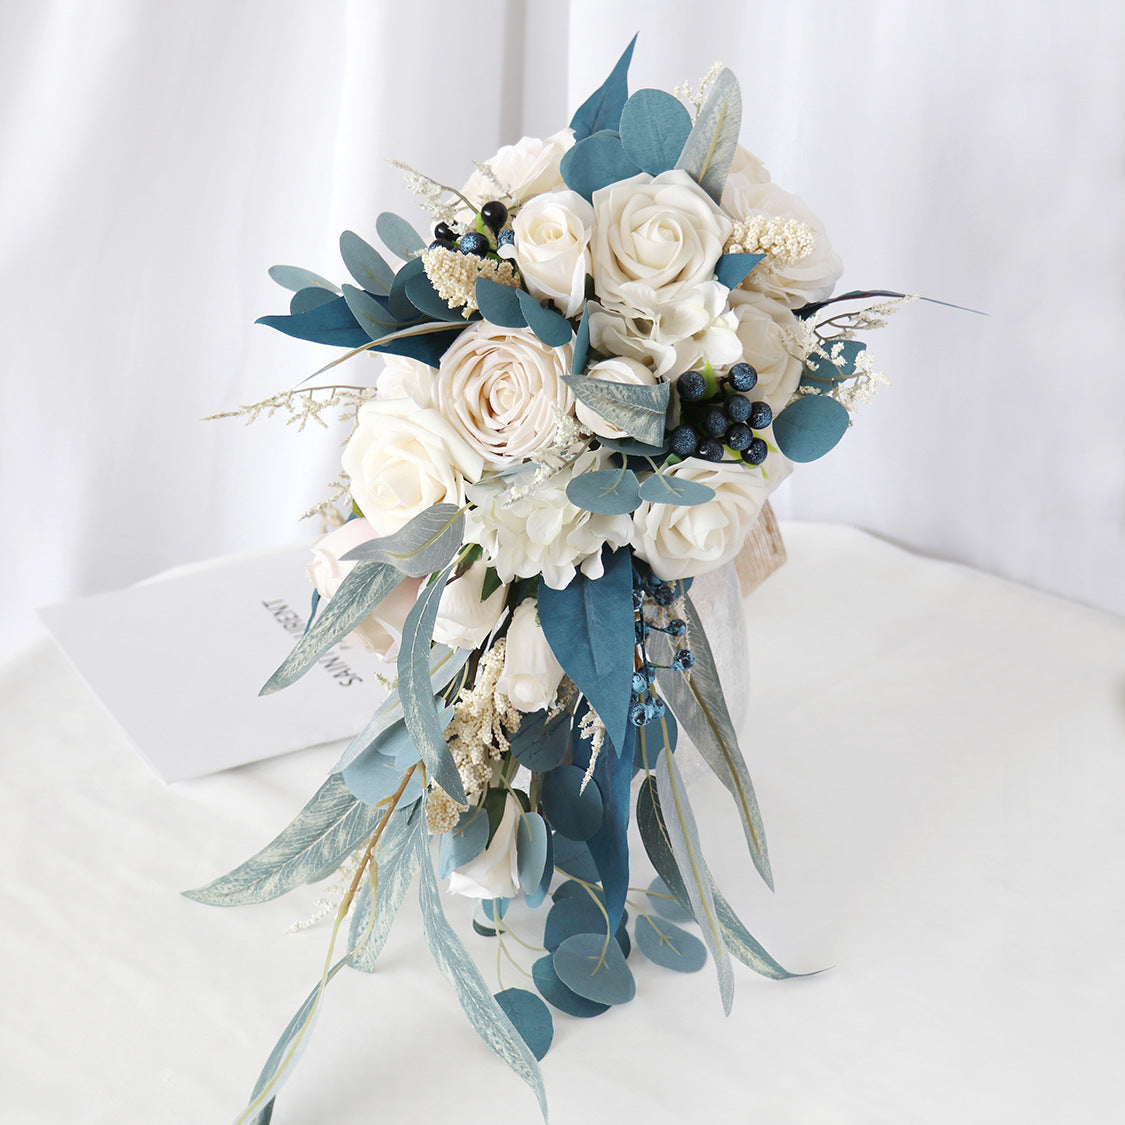 Hand Bouquet Peacock Blue Champagne Roses